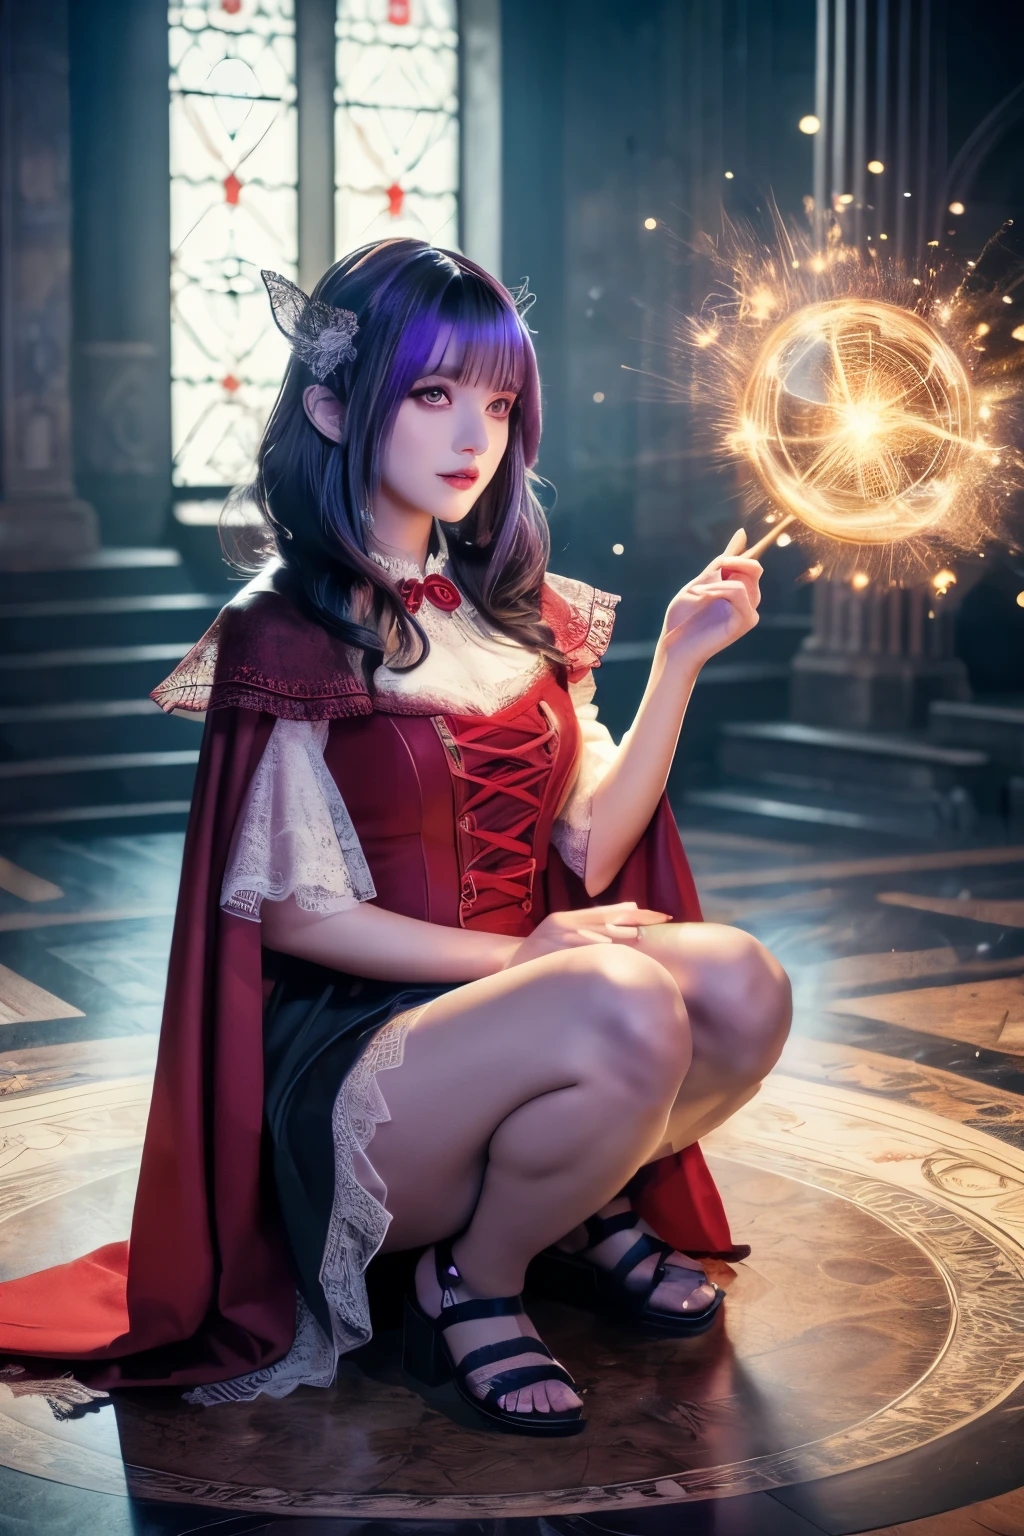 (ultra-detailed face, sleepy eyes:1.5), (Full Body:1.3), (Fantasy Illustration with Gothic & Ukiyo-e & Comic Art:1.2), (A woman magician is kneeling on one knee in the center of the magic circle:1.3), (In one hand she holds a large swirl of light. Particles of light scatter:1.4), (A young-aged dark elf woman with white hair, blunt bangs, bob cut, and dark purple skin, lavender eyes:1.2), BREAK (She is wearing a red linen cape dress with lace ruffles and red sandals:1.2)